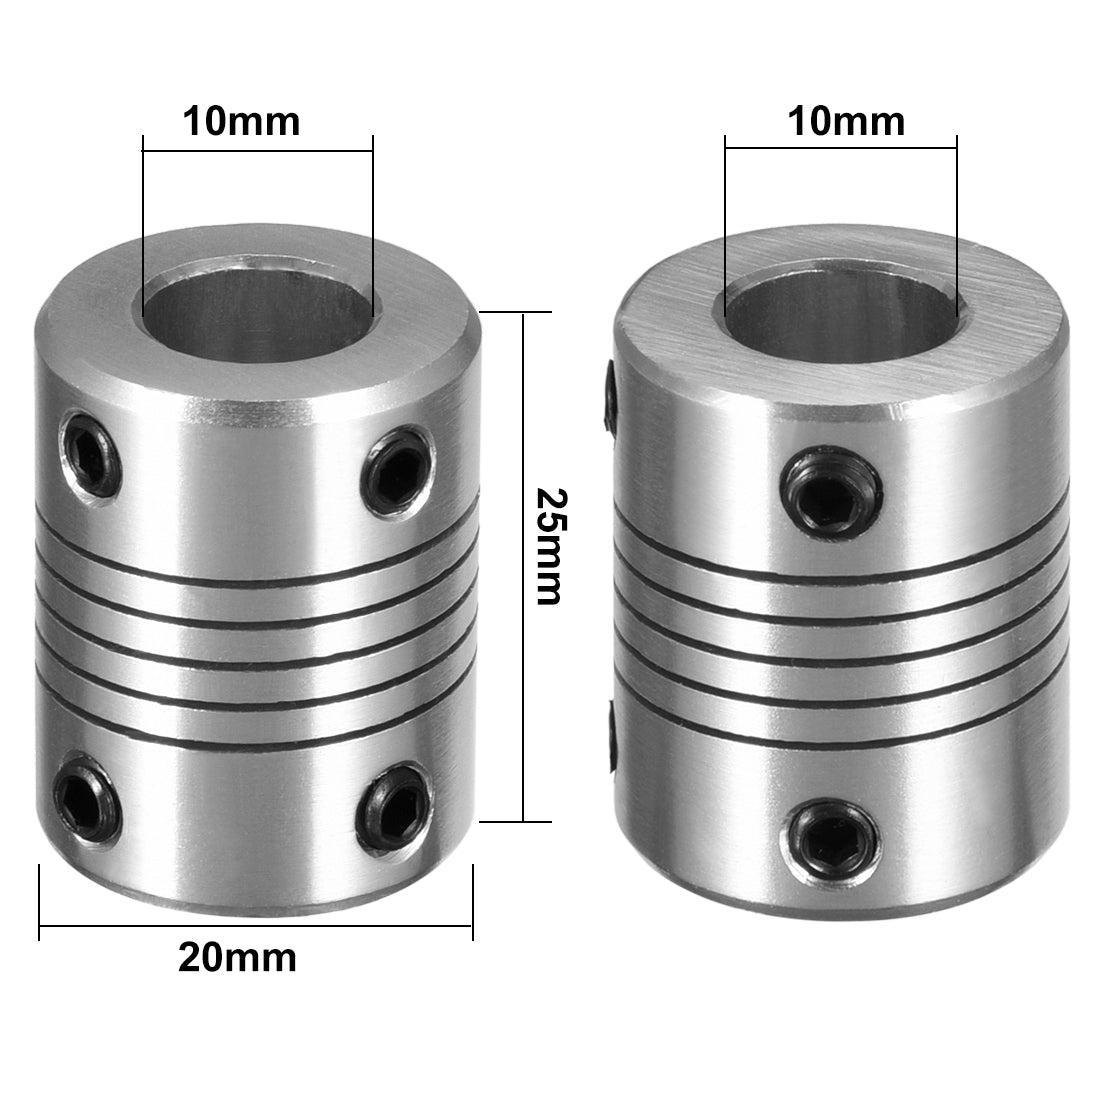 uxcell Uxcell 10mm to 10mm Stainless Steel Shaft Coupling Flexible Coupler Motor Connector Joint L25xD20 Silver